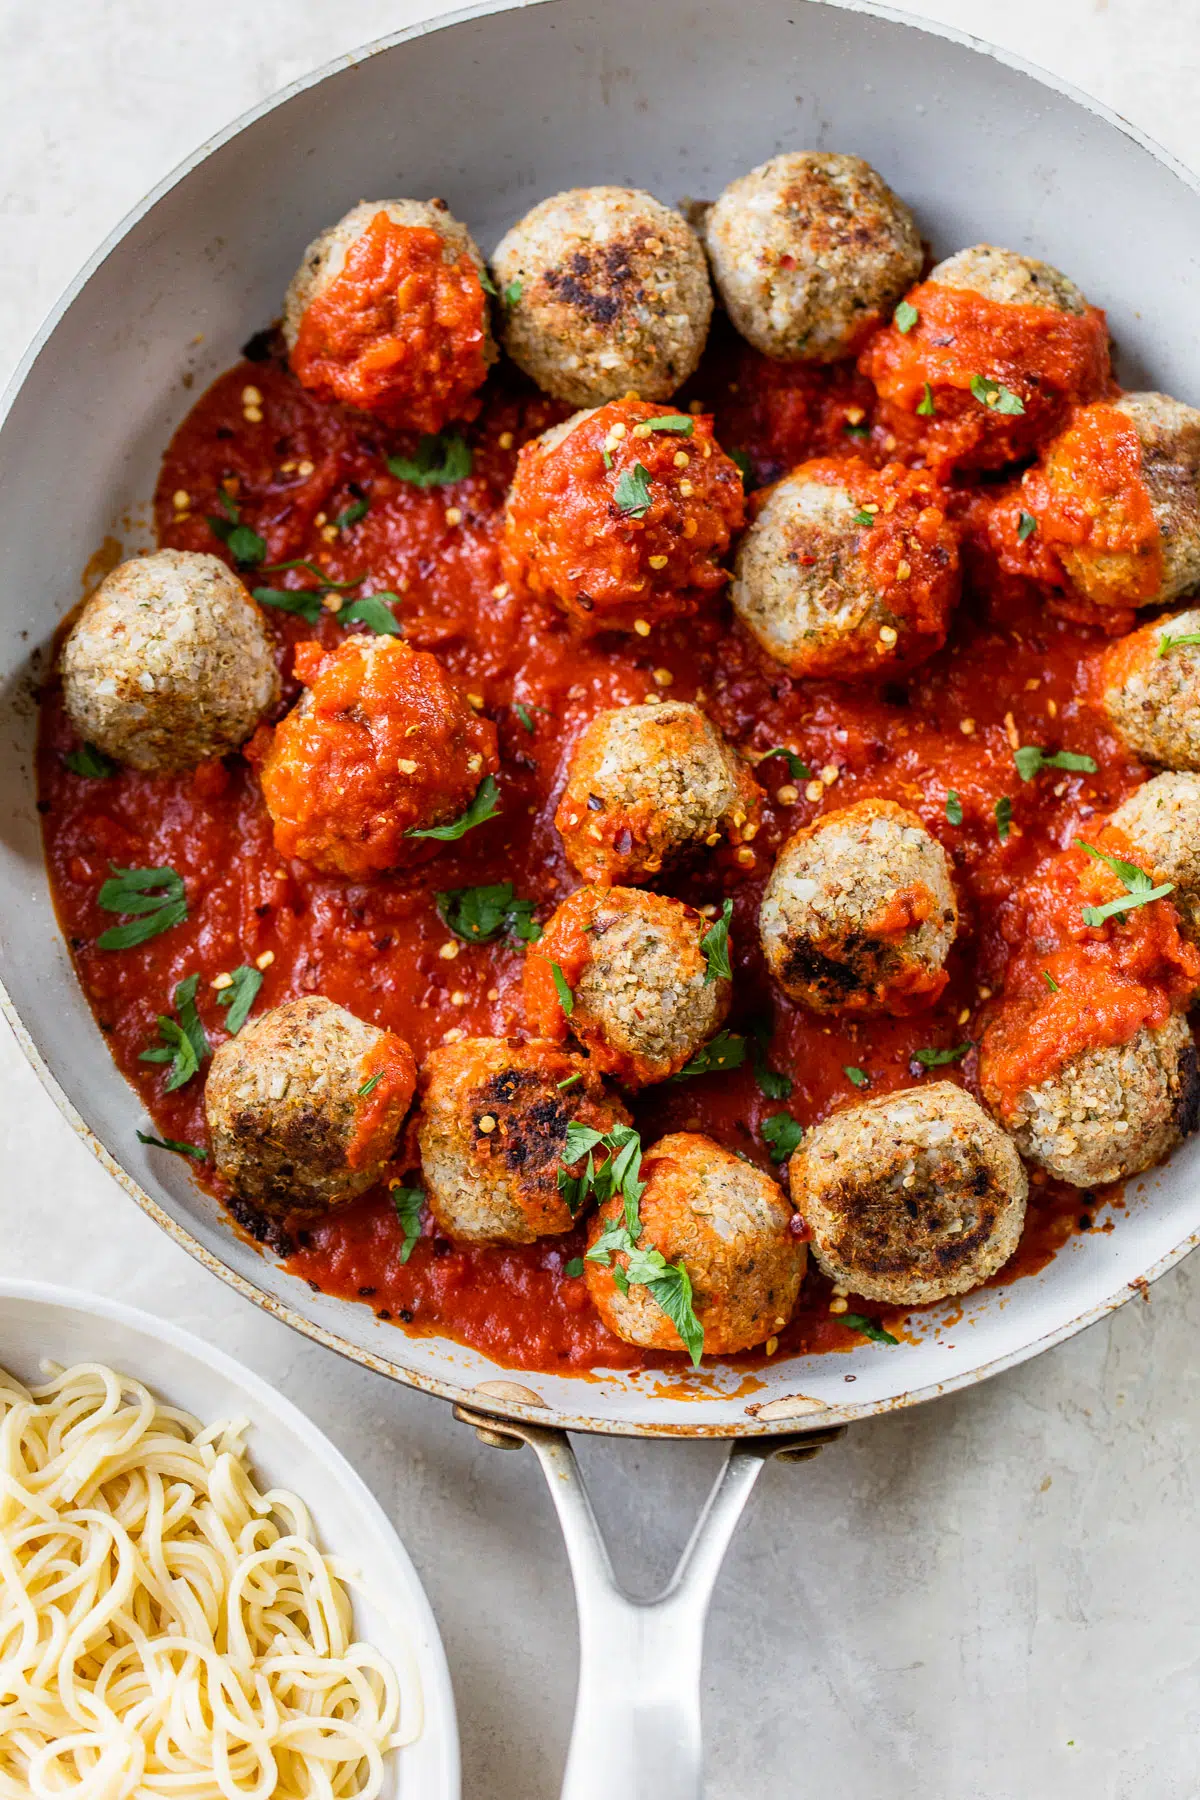 skillet filled with meatballs coated in marinara sauce